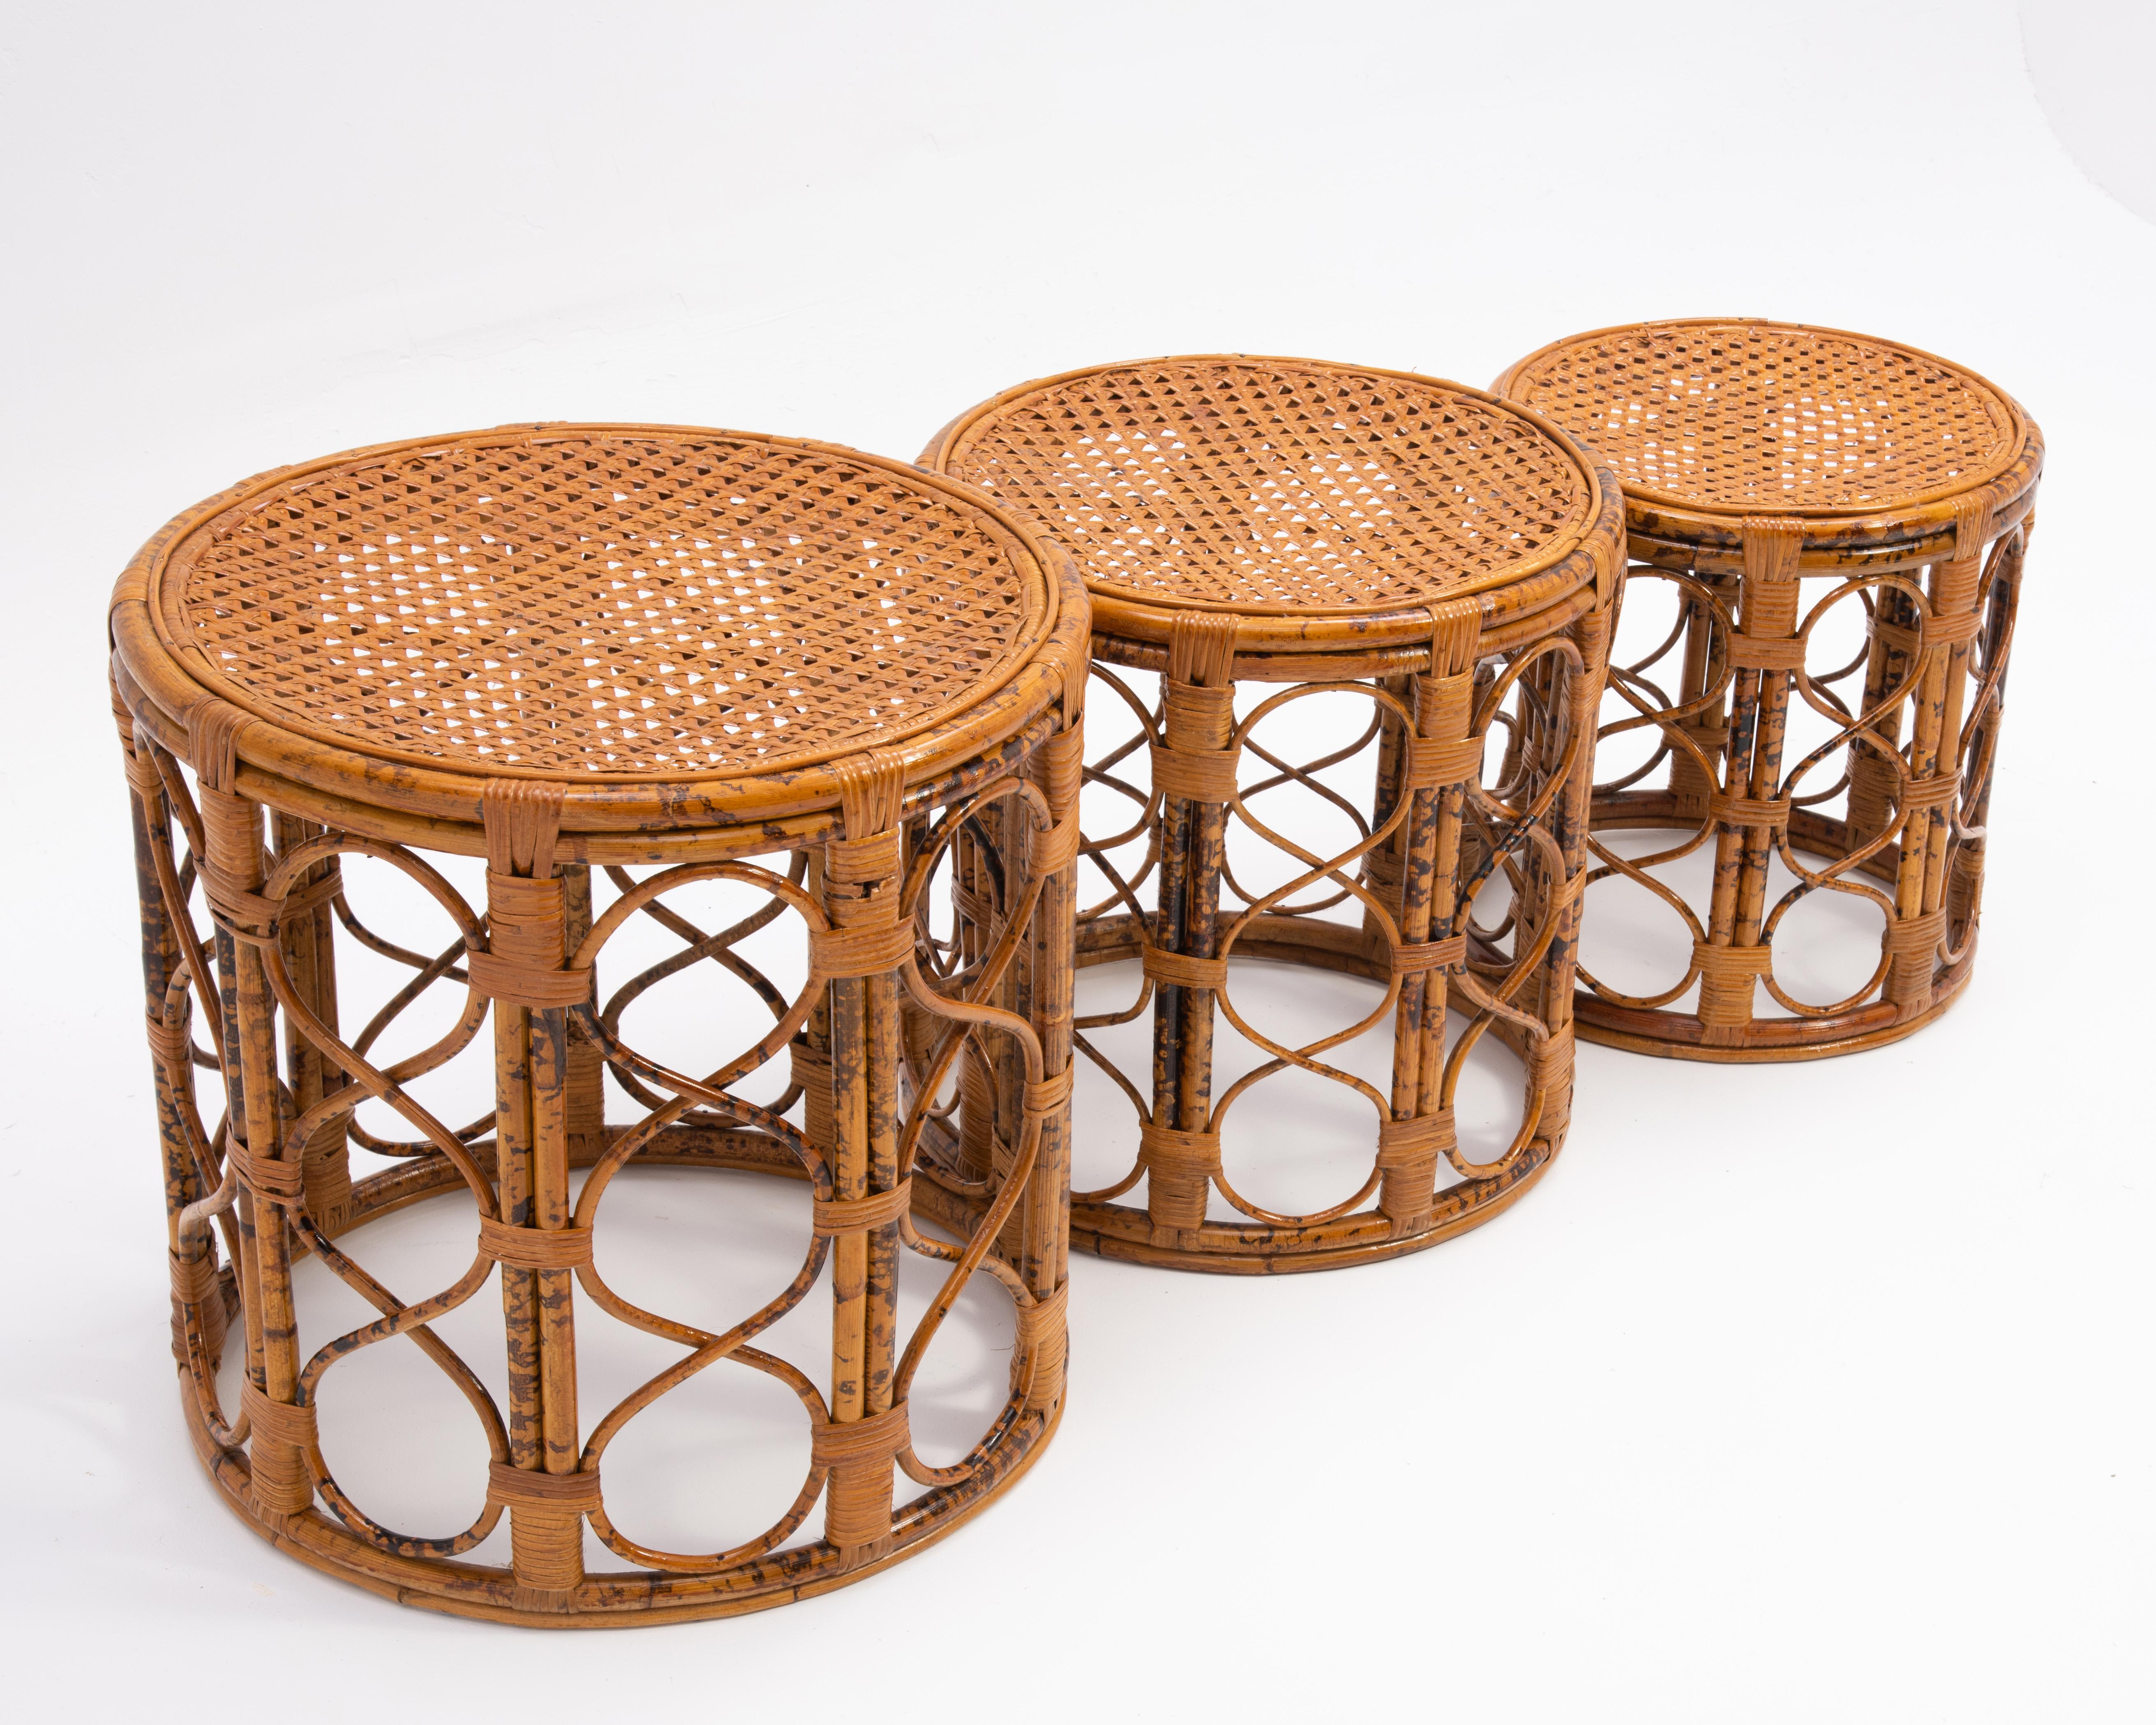 Mid-Century Modern Mid-Century Rattan Bamboo Nesting Tables Tortoise Shell Scorched Brunt Finish